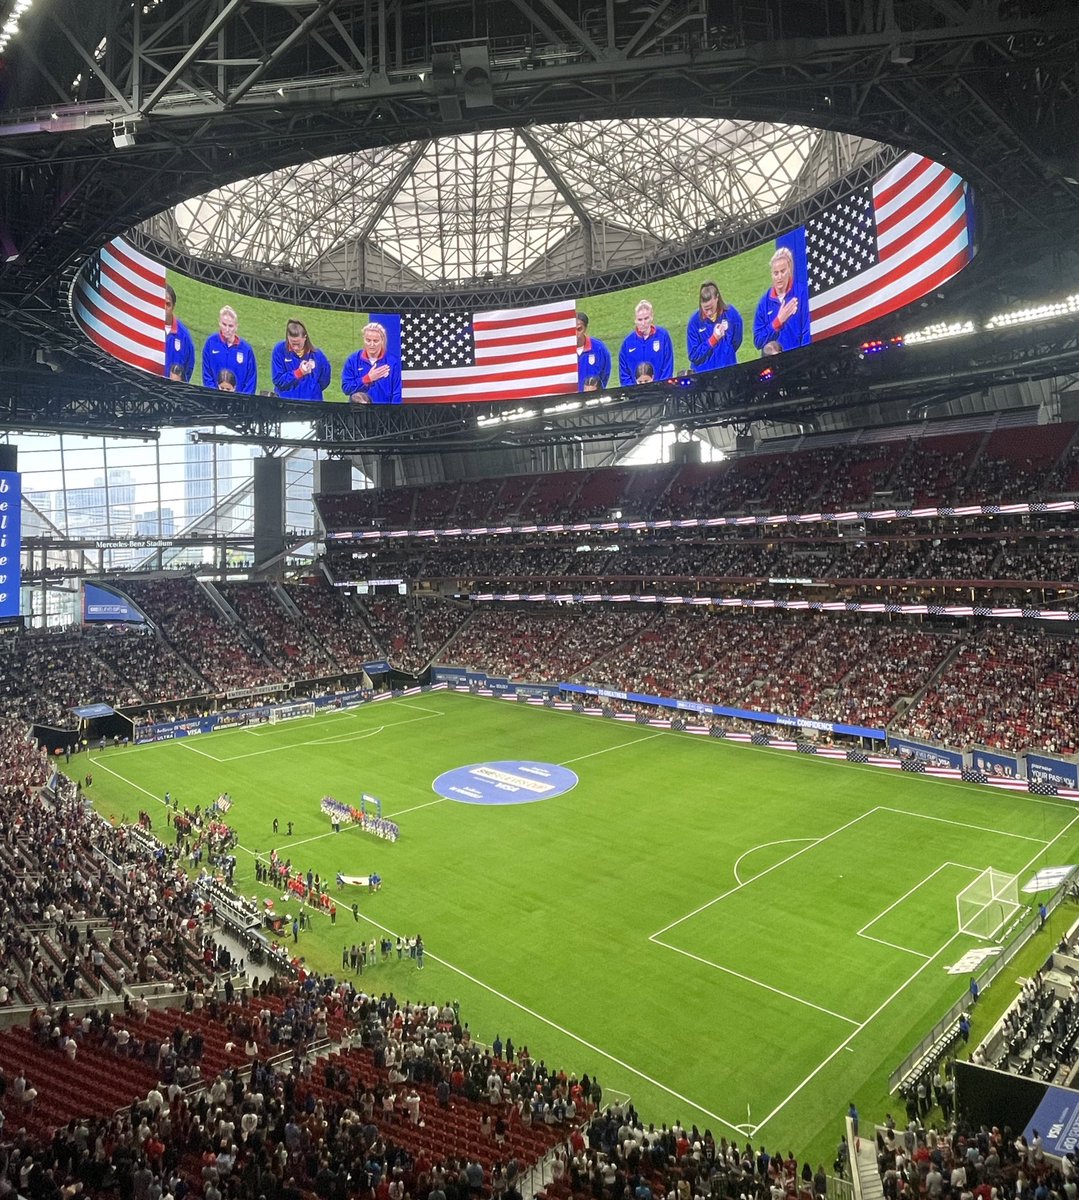 This is just so cool to see women’s soccer in this building. First-ever match for the #USWNT at Mercedes-Benz Stadium. The first time in eight years they’ve played in Atlanta.